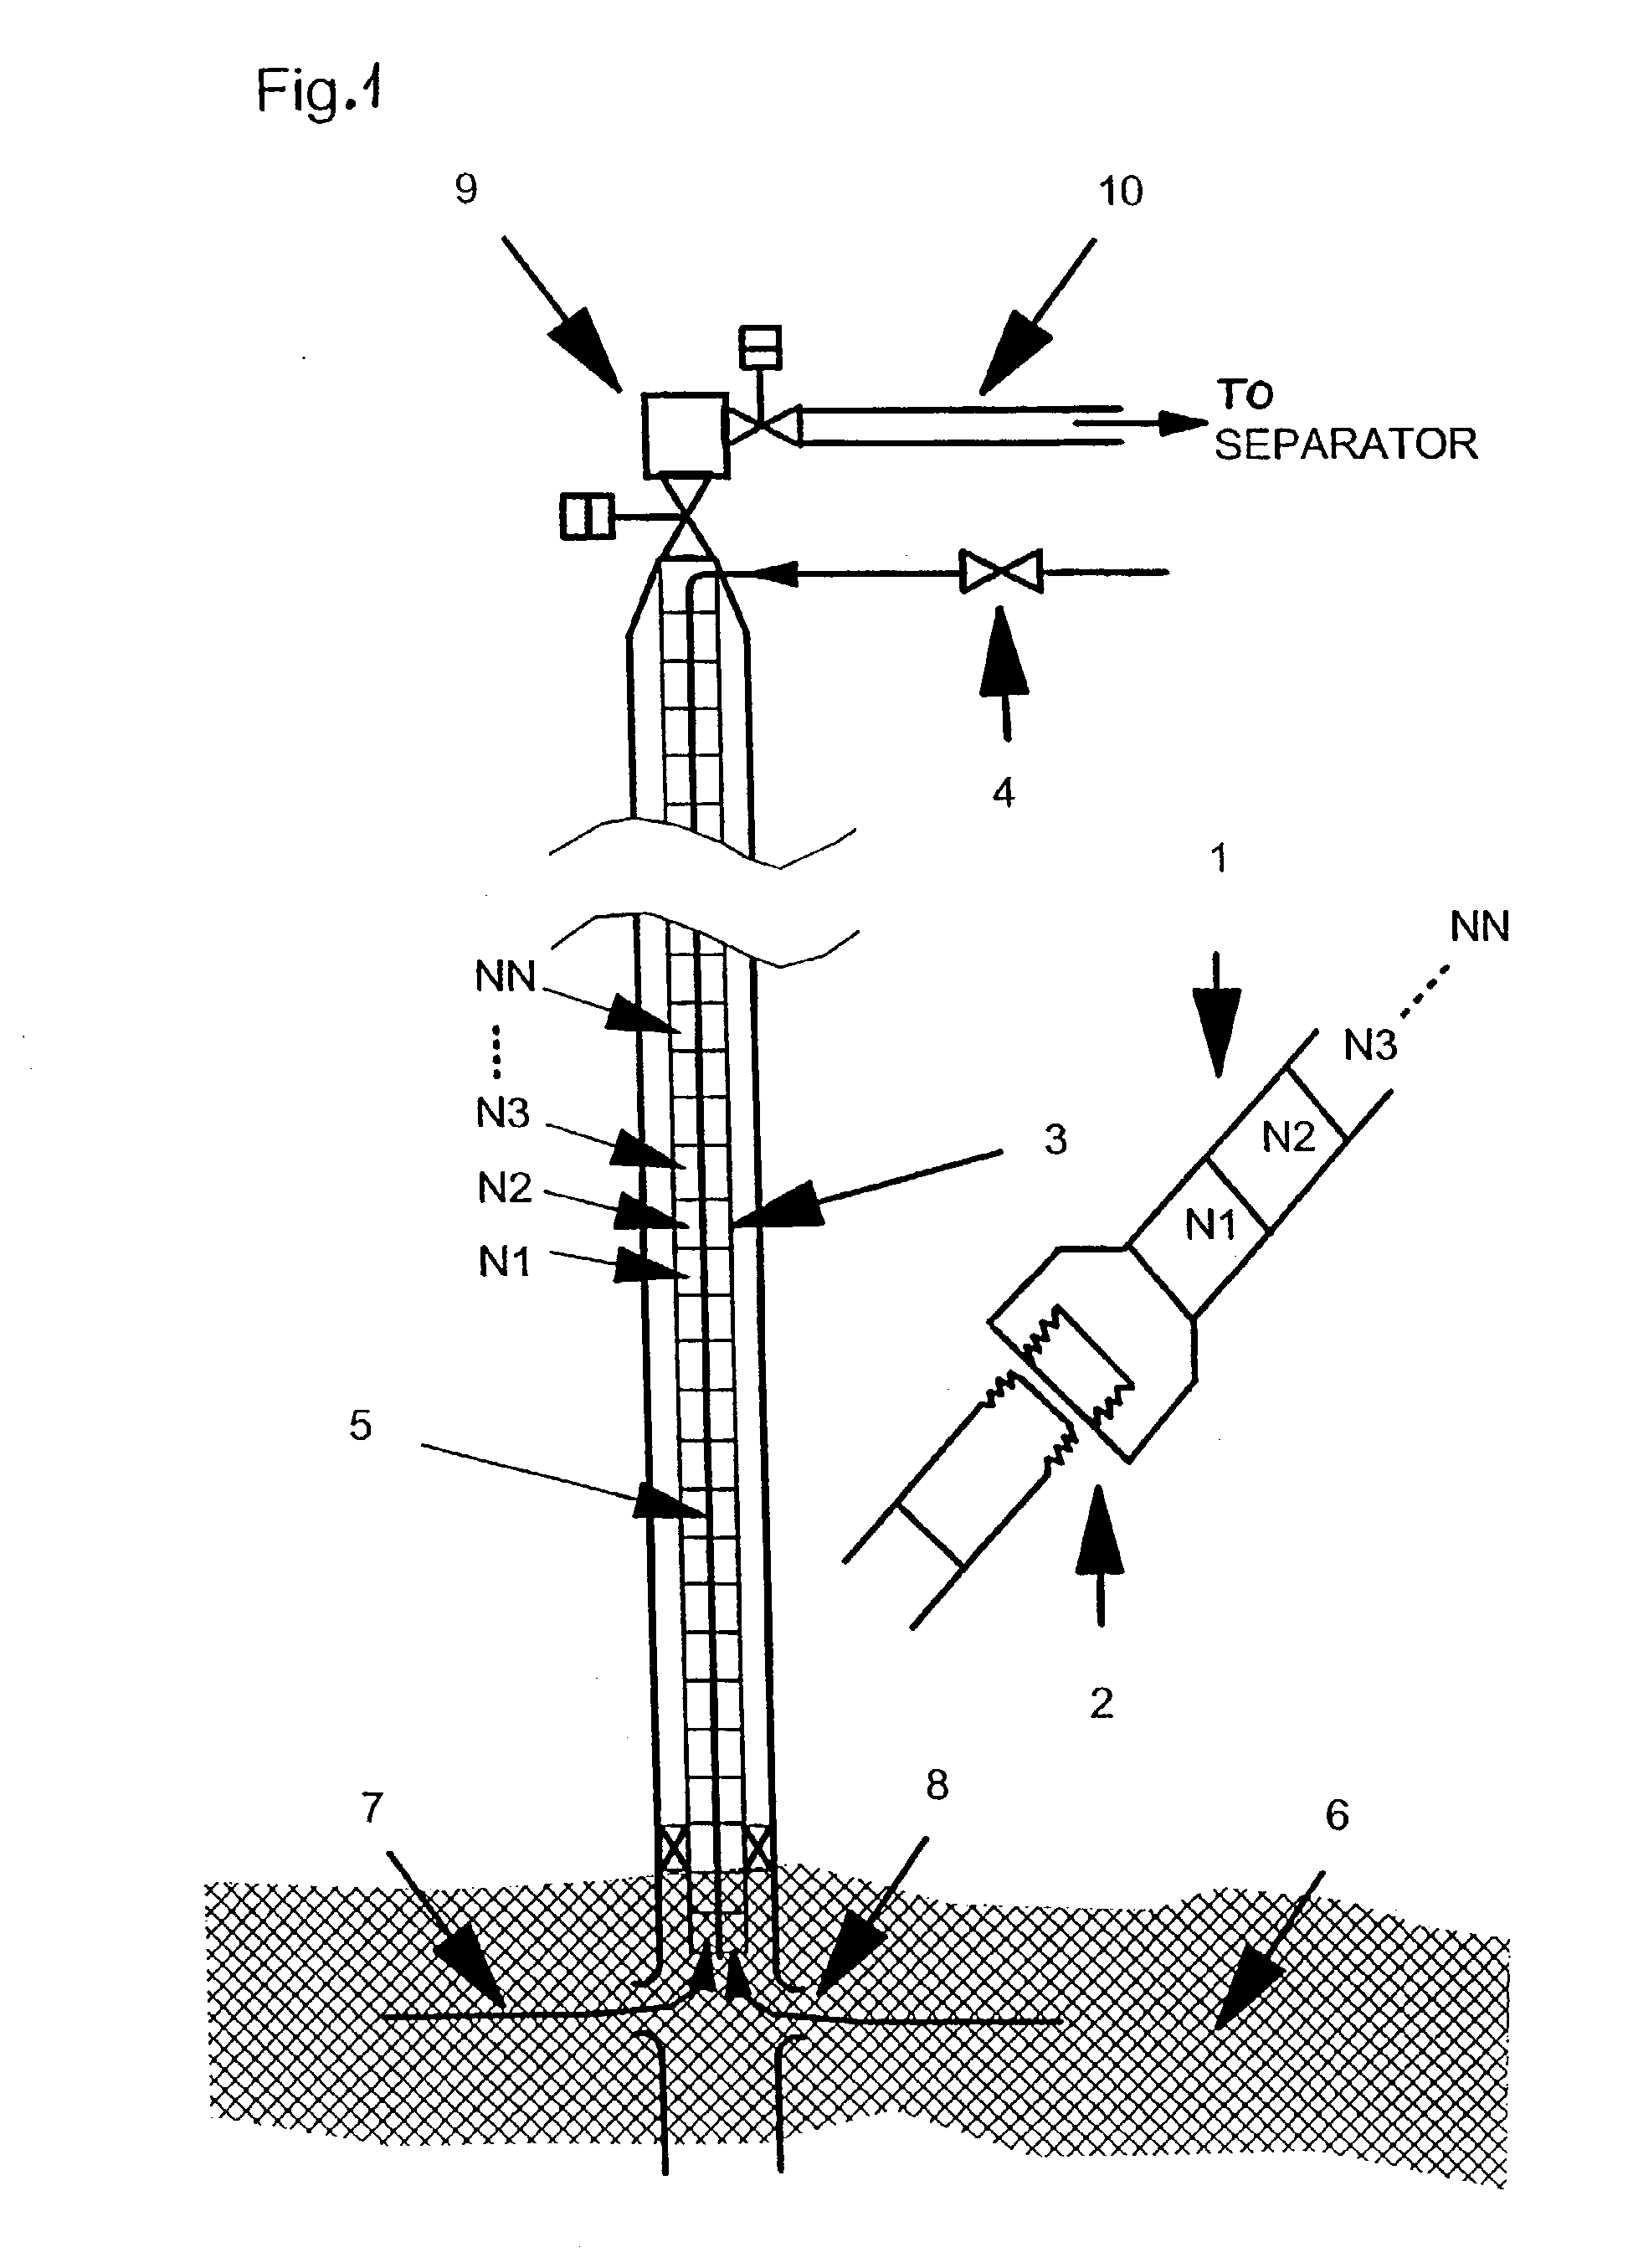 Method and system for gas-lifting well effluents